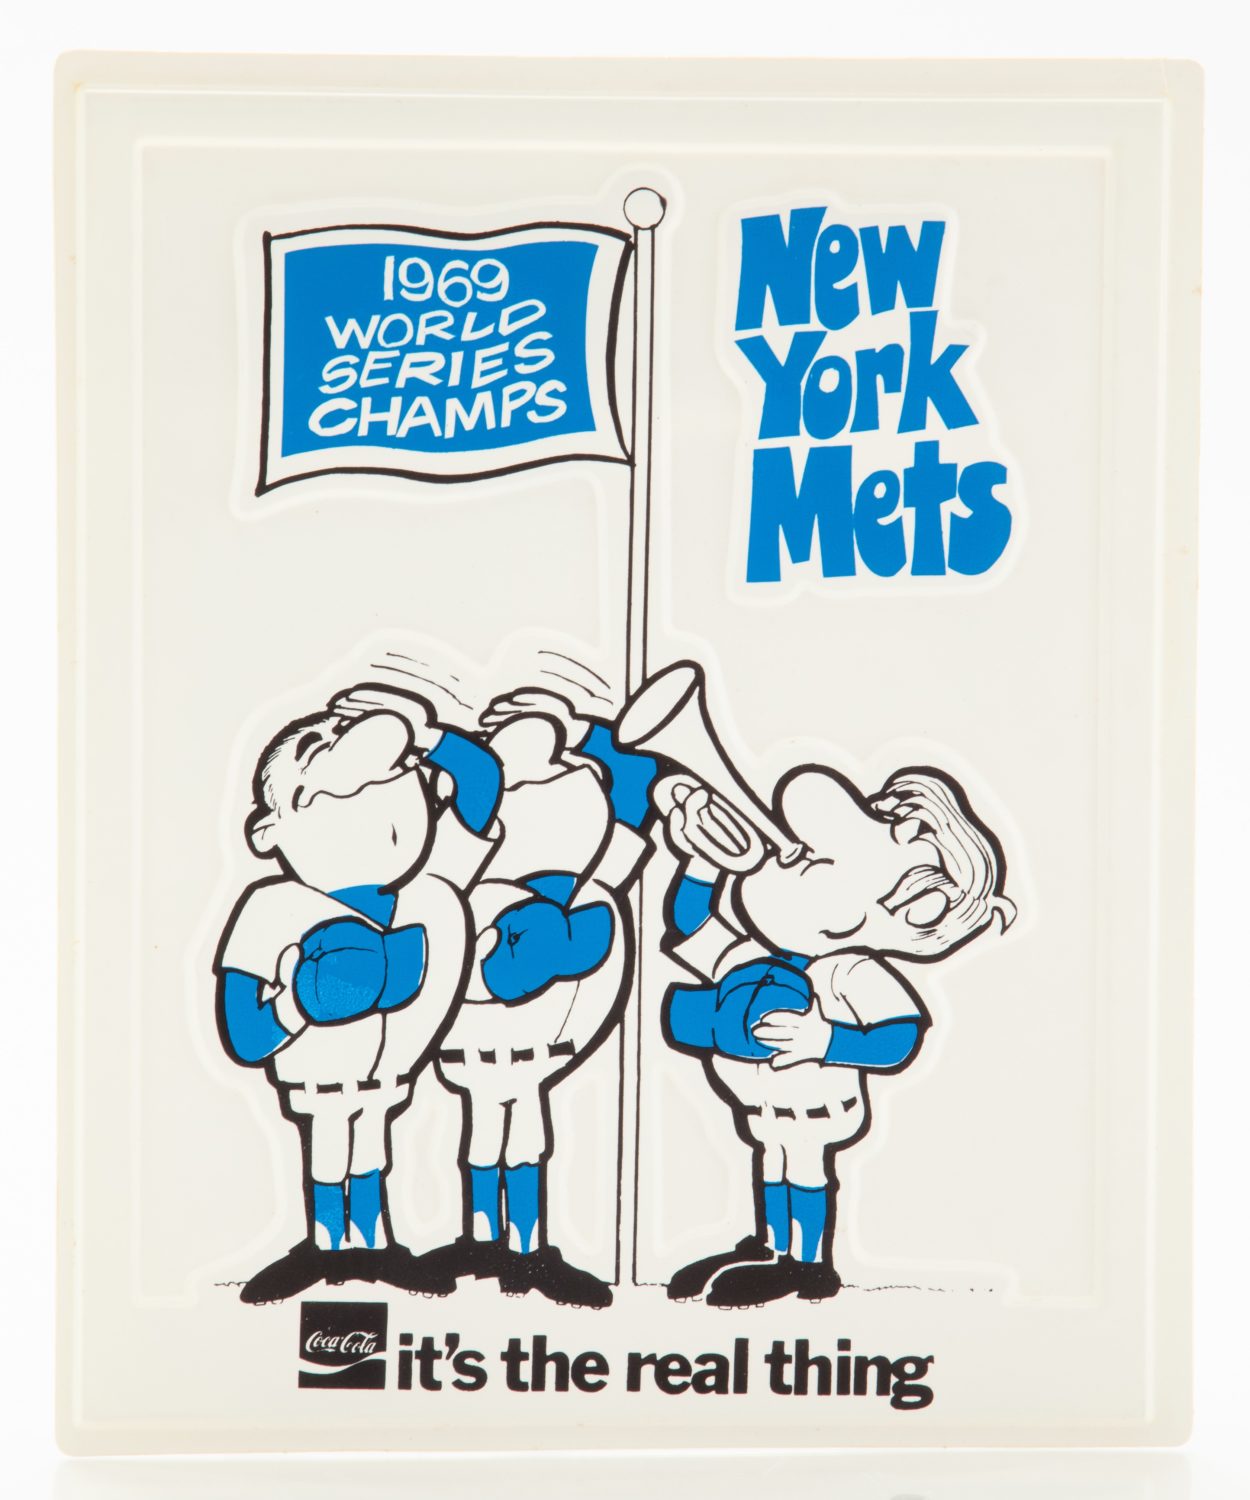 New York Mets 1969 World Series Champs Poster by Coca-Cola